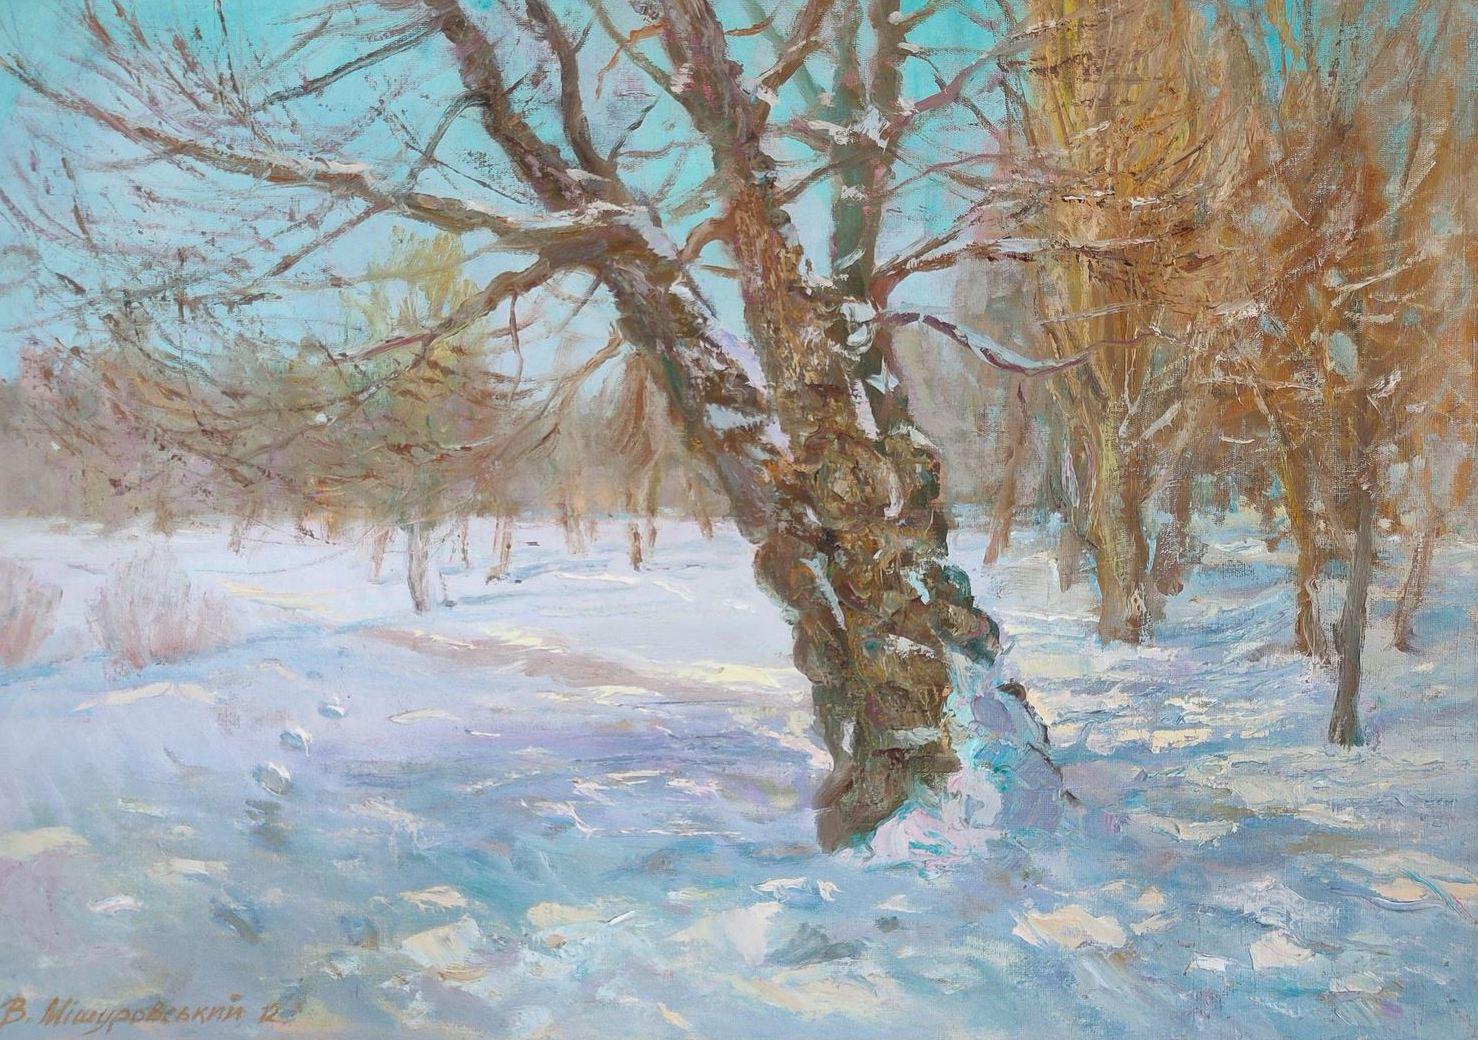 Mishurovskiy V. Landscape Painting - Snow and sun, Original oil Painting, Ready to Hang